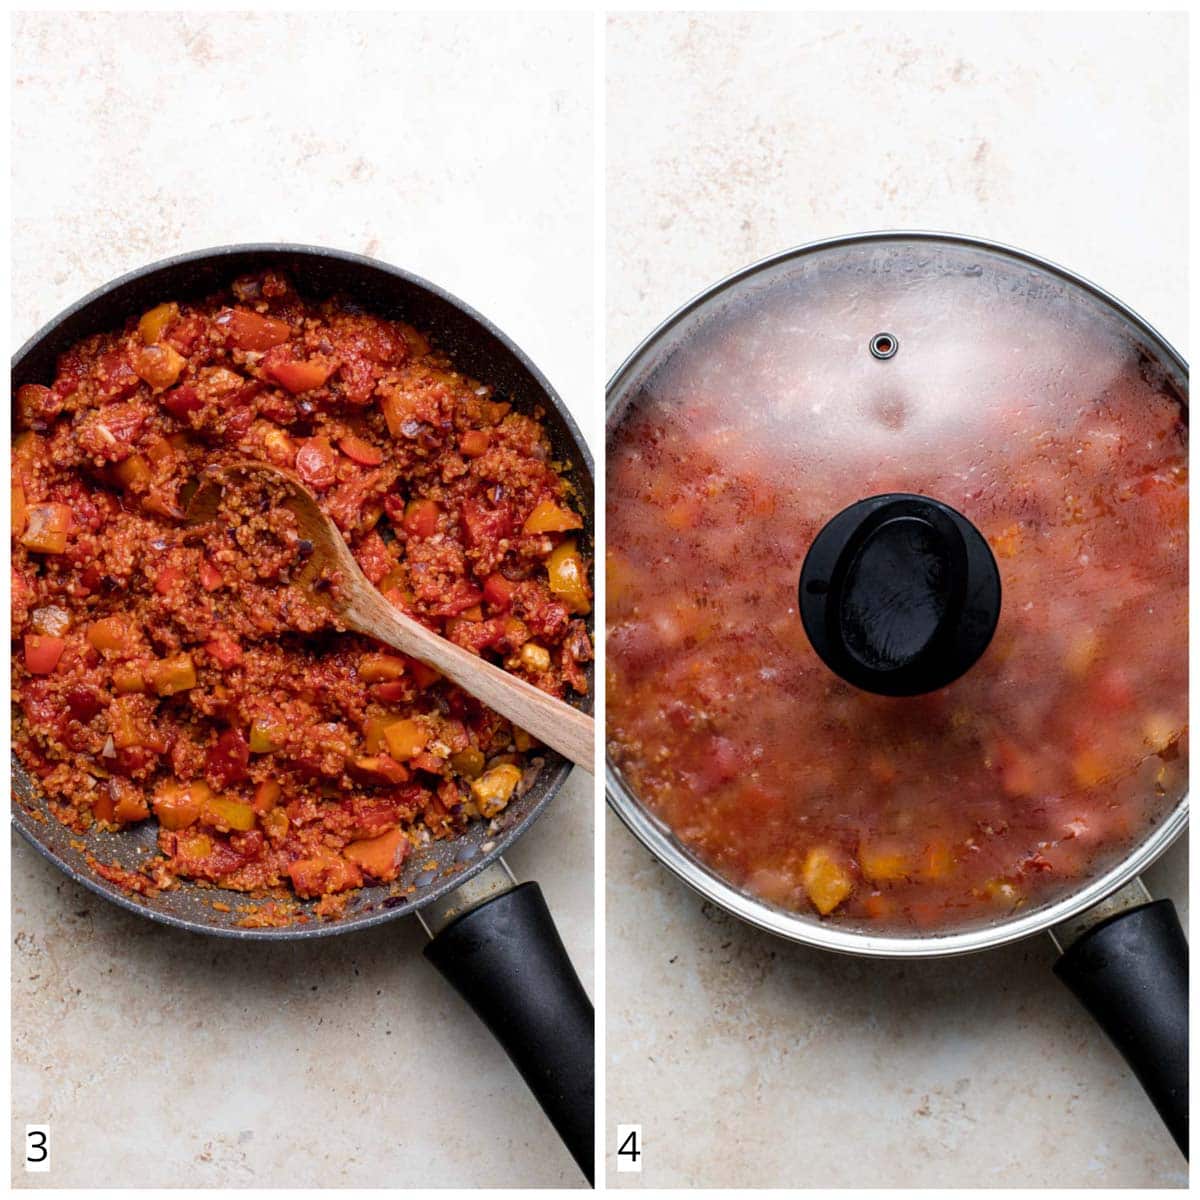 A collage of two images showing the last two steps in making a bulgur tomato dish.